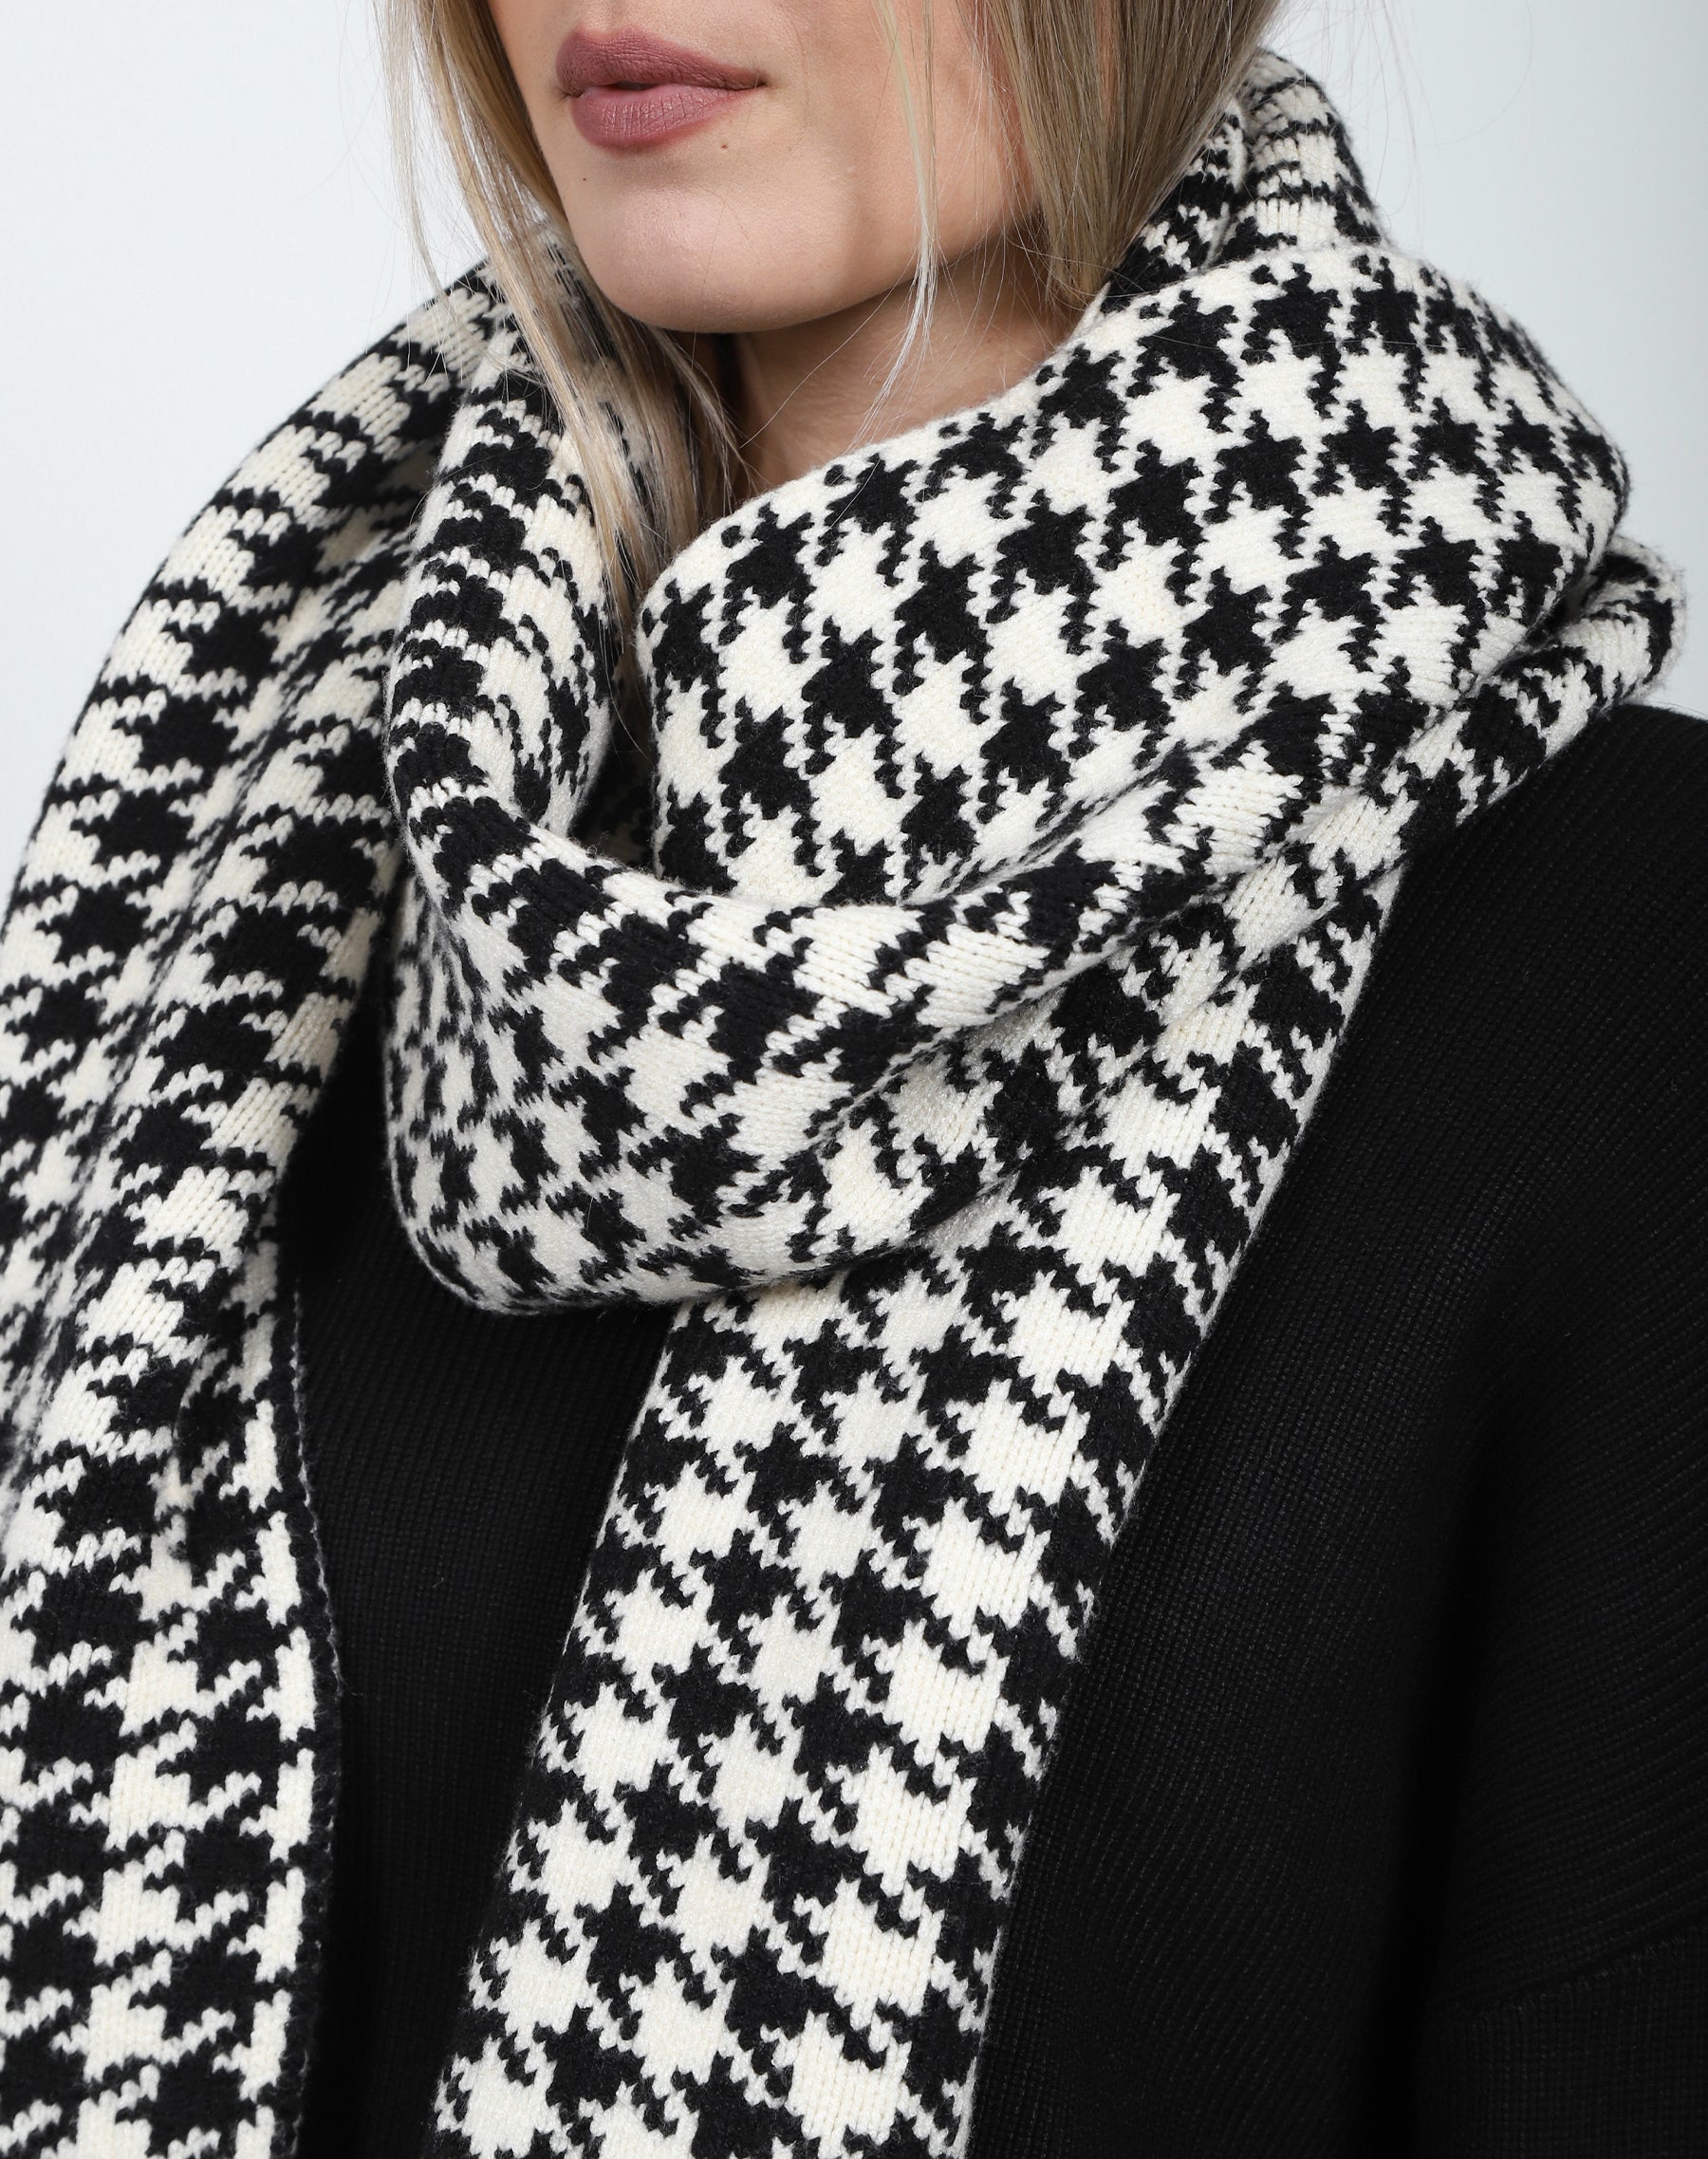 The Houndstooth Blanket Scarf | Black and Cream